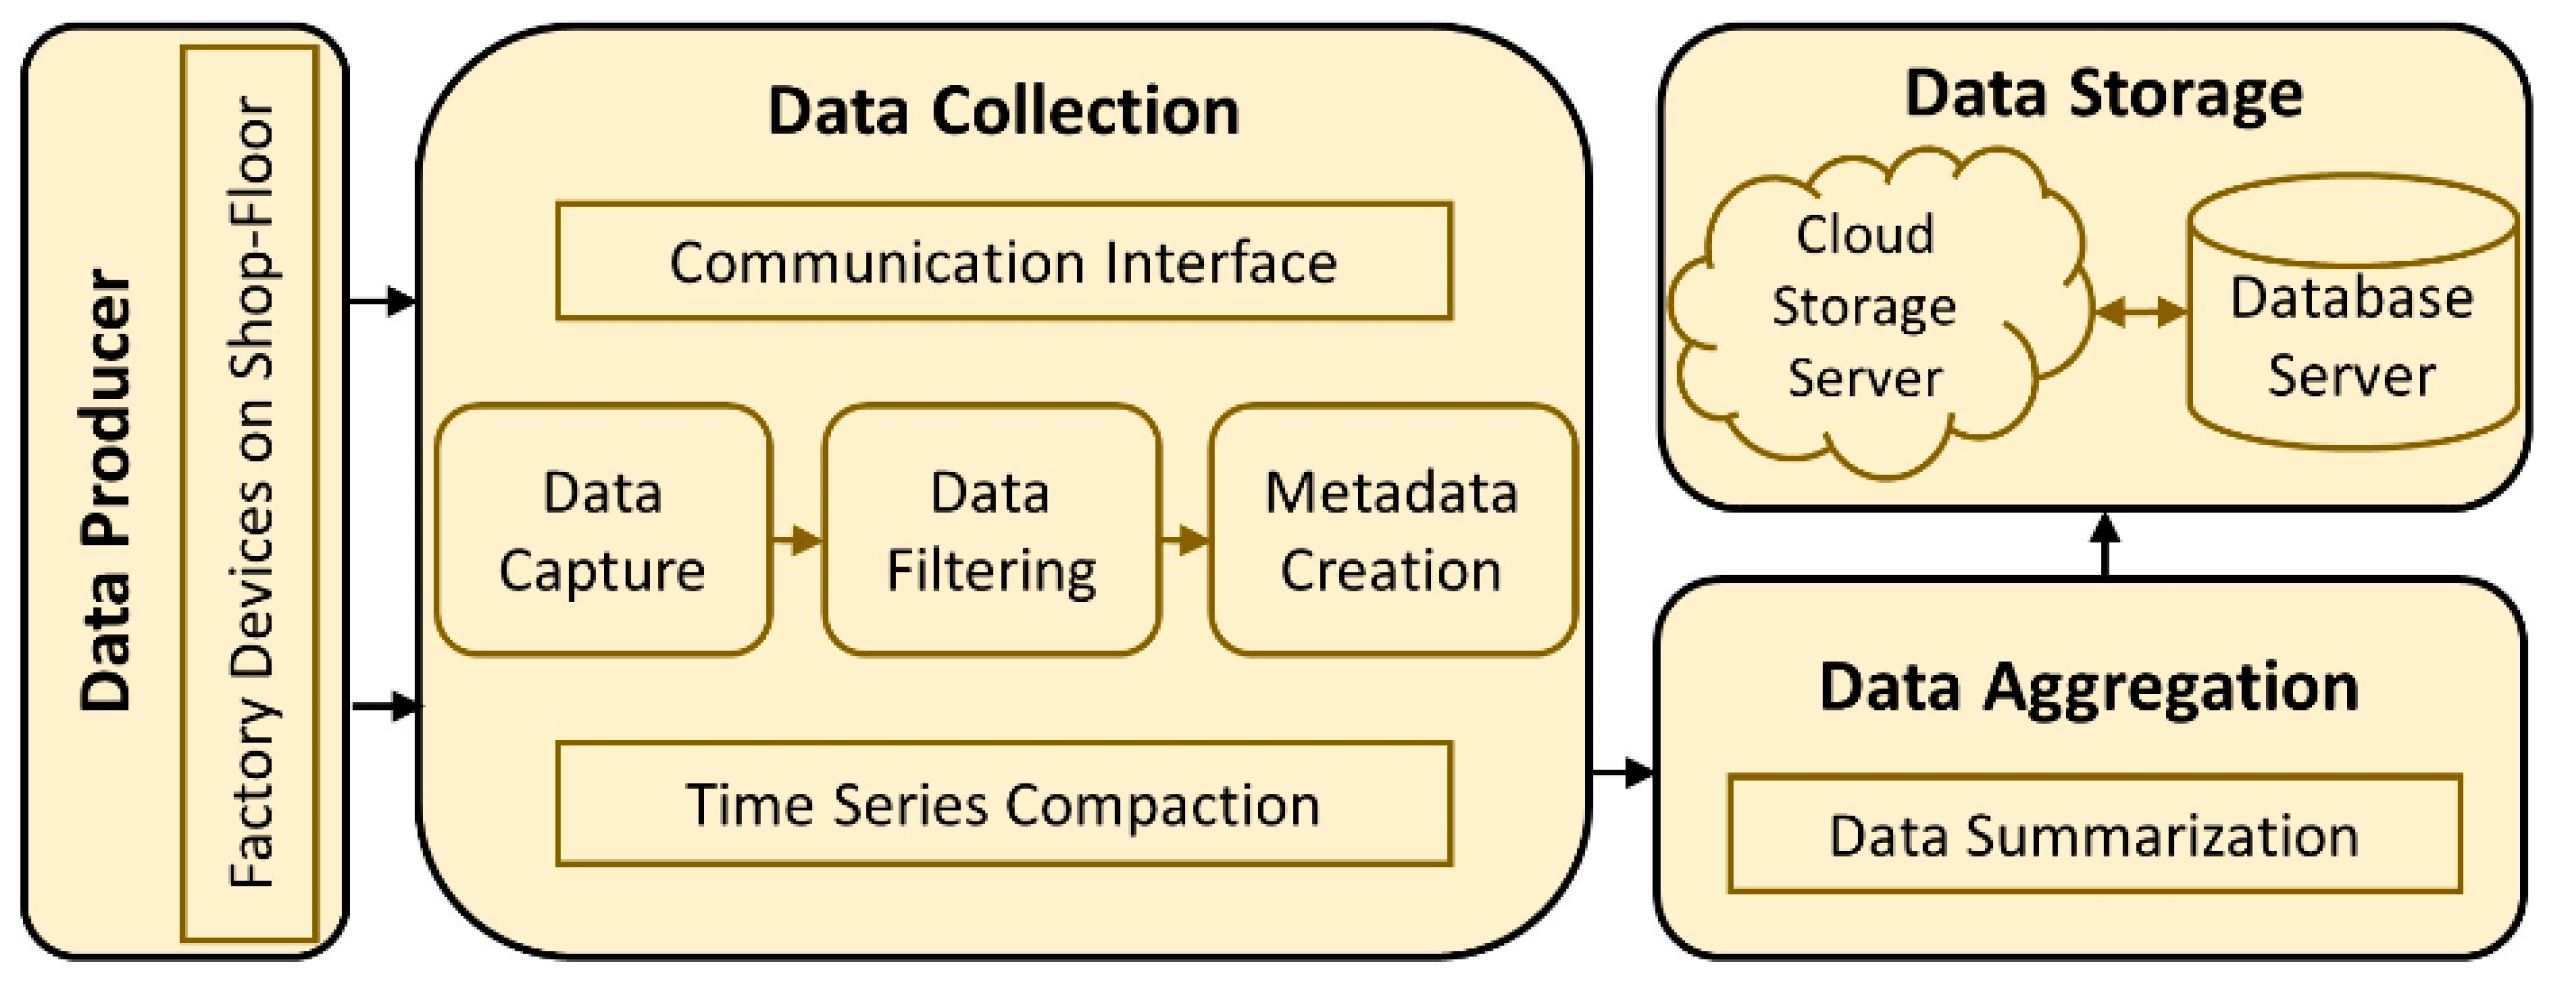 Use collection data